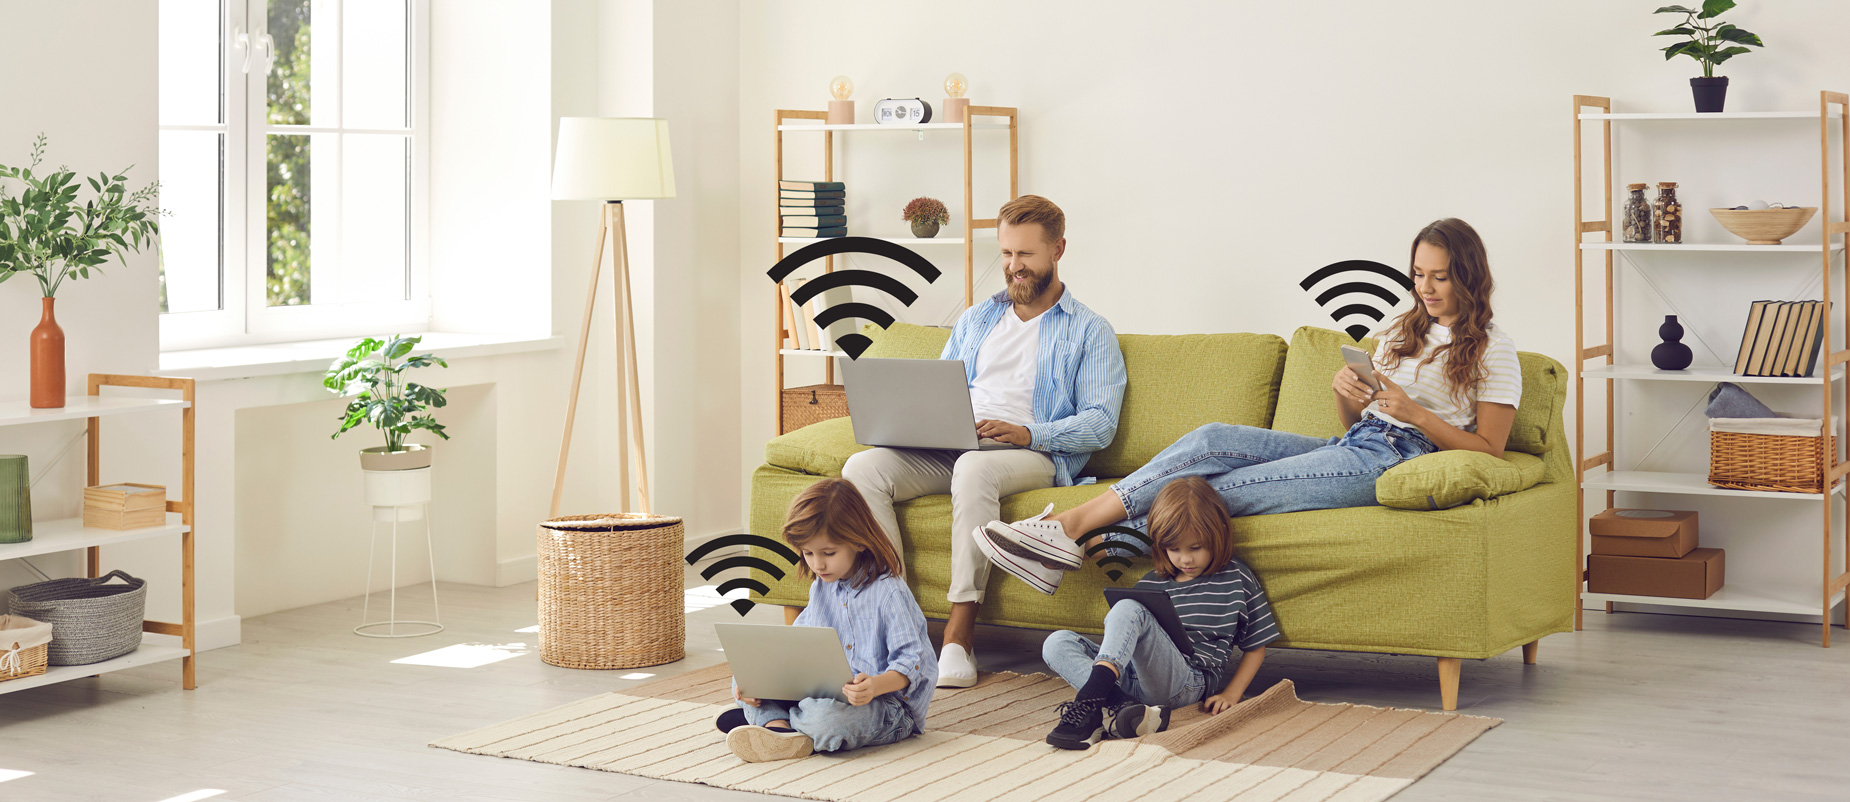 MDU Wi-Fi 101: What You Need to Know